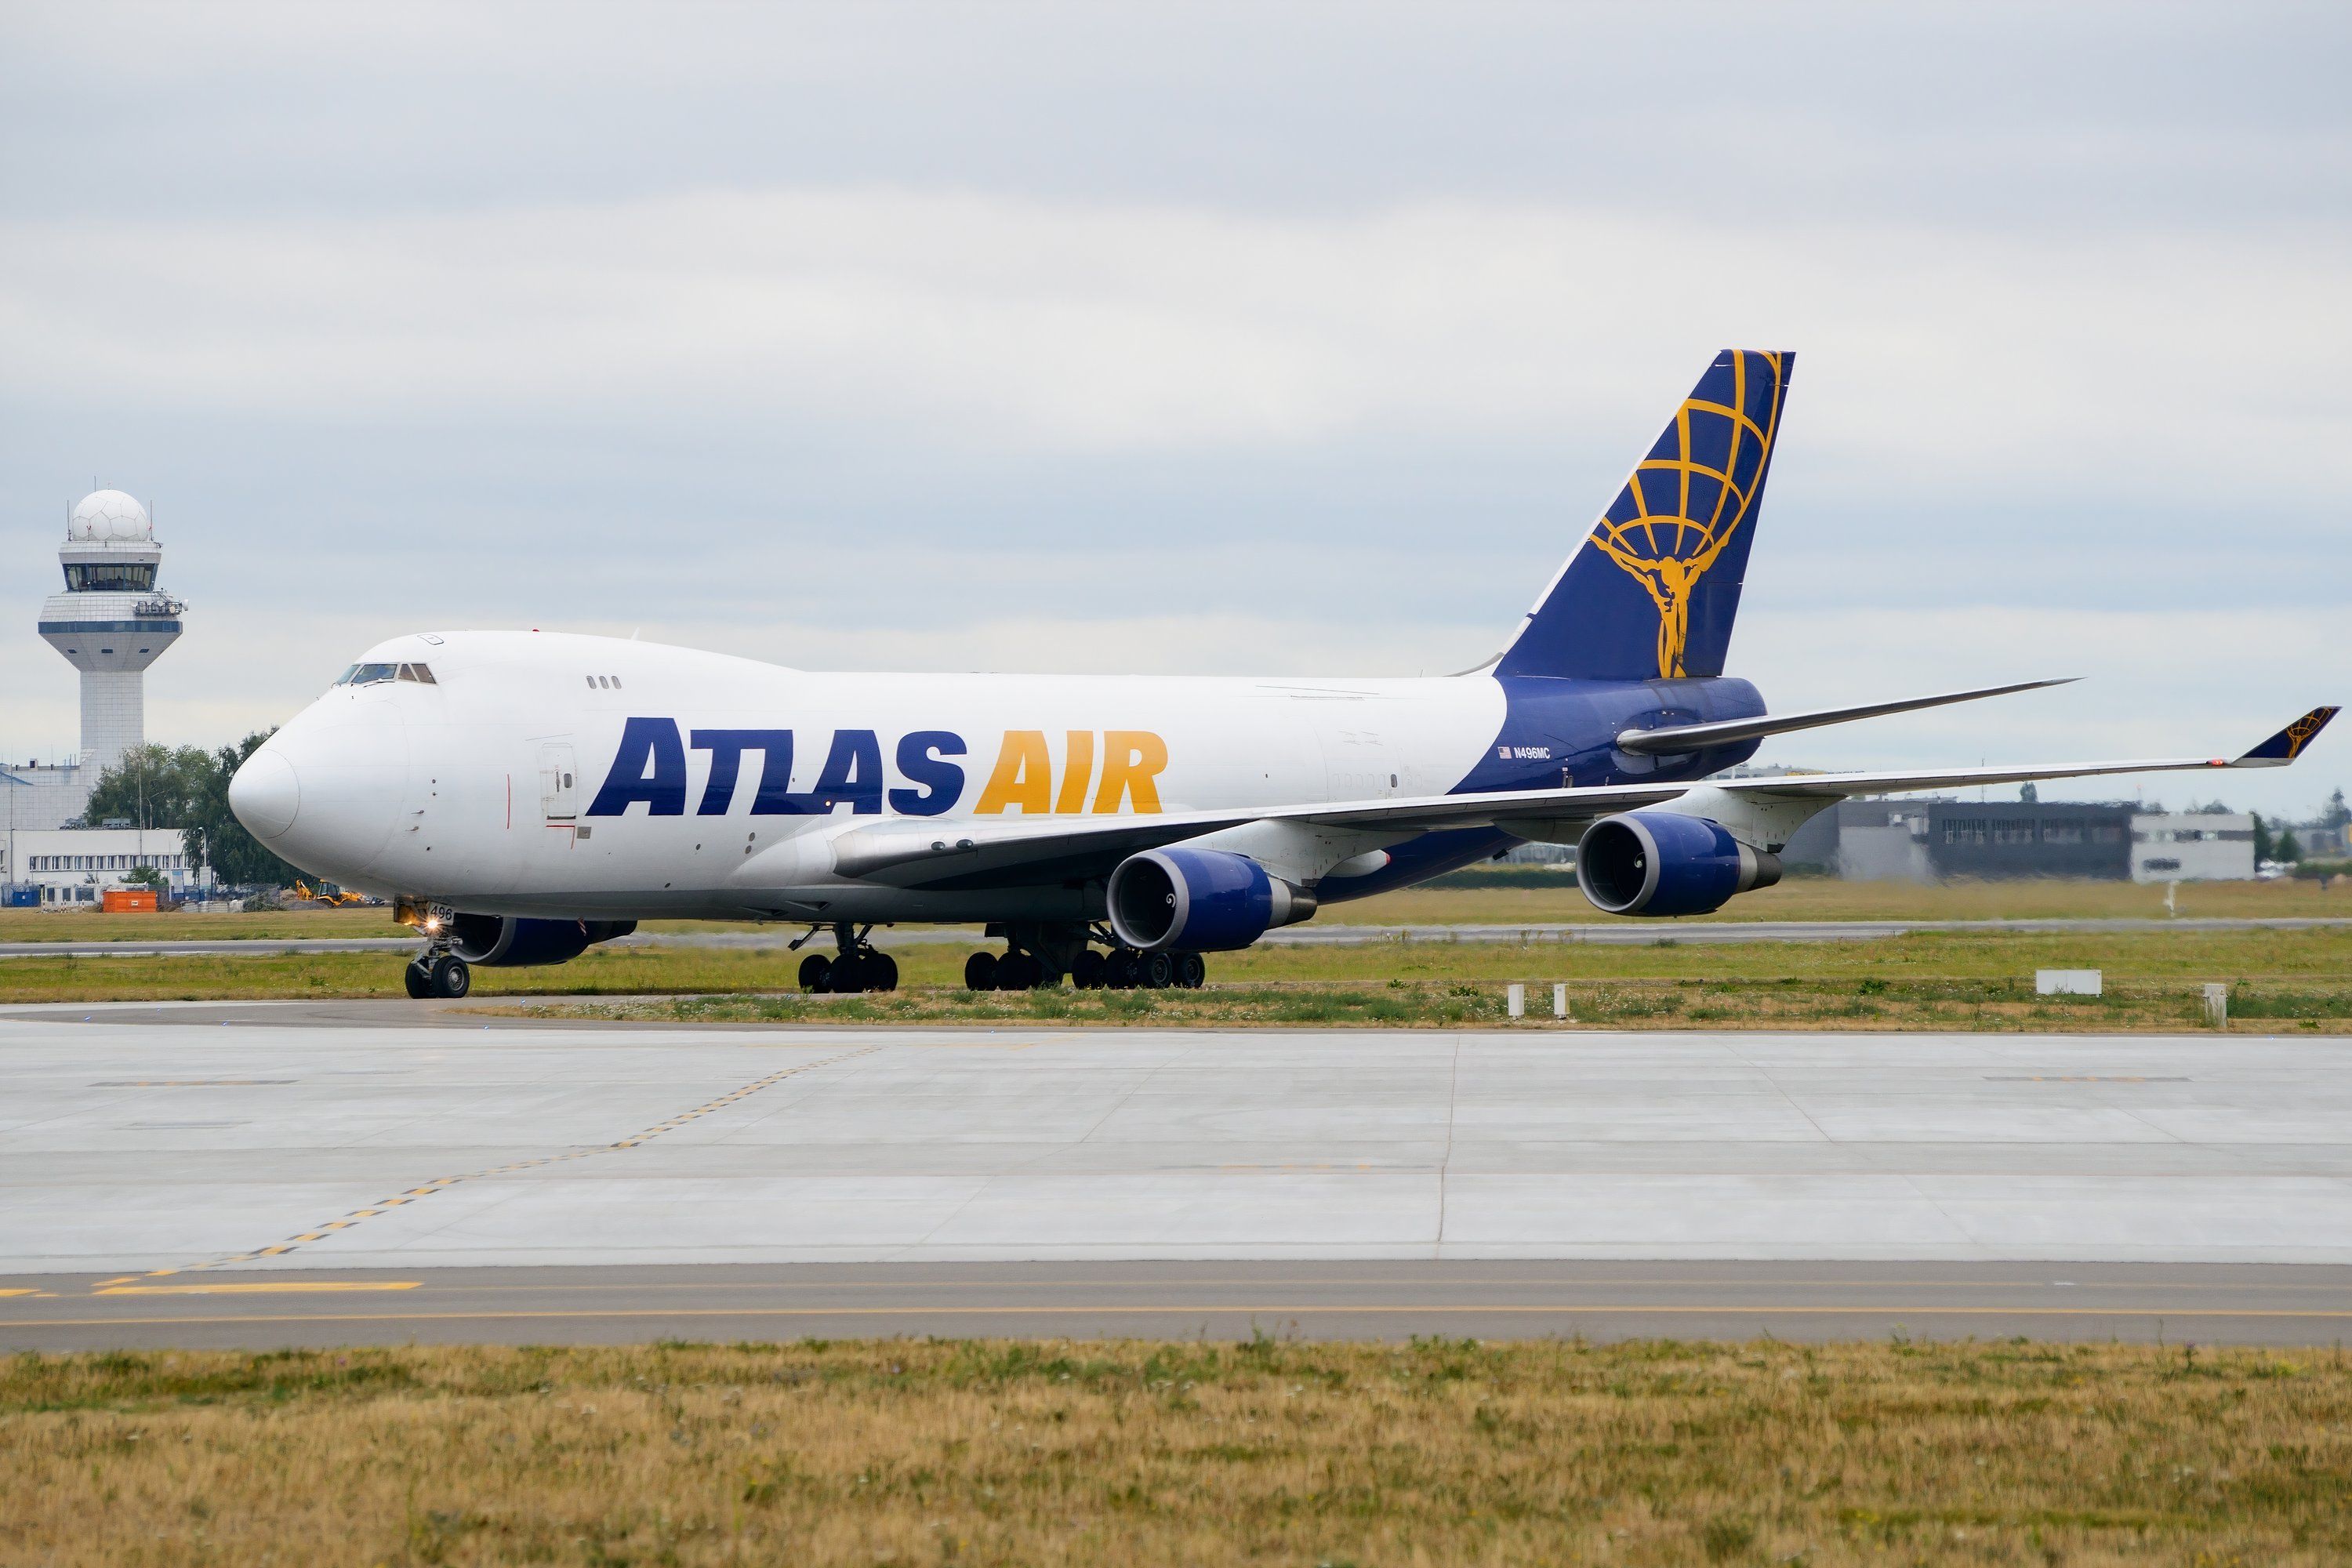 Atlas Air Boeing 747-4F taxiing on ground